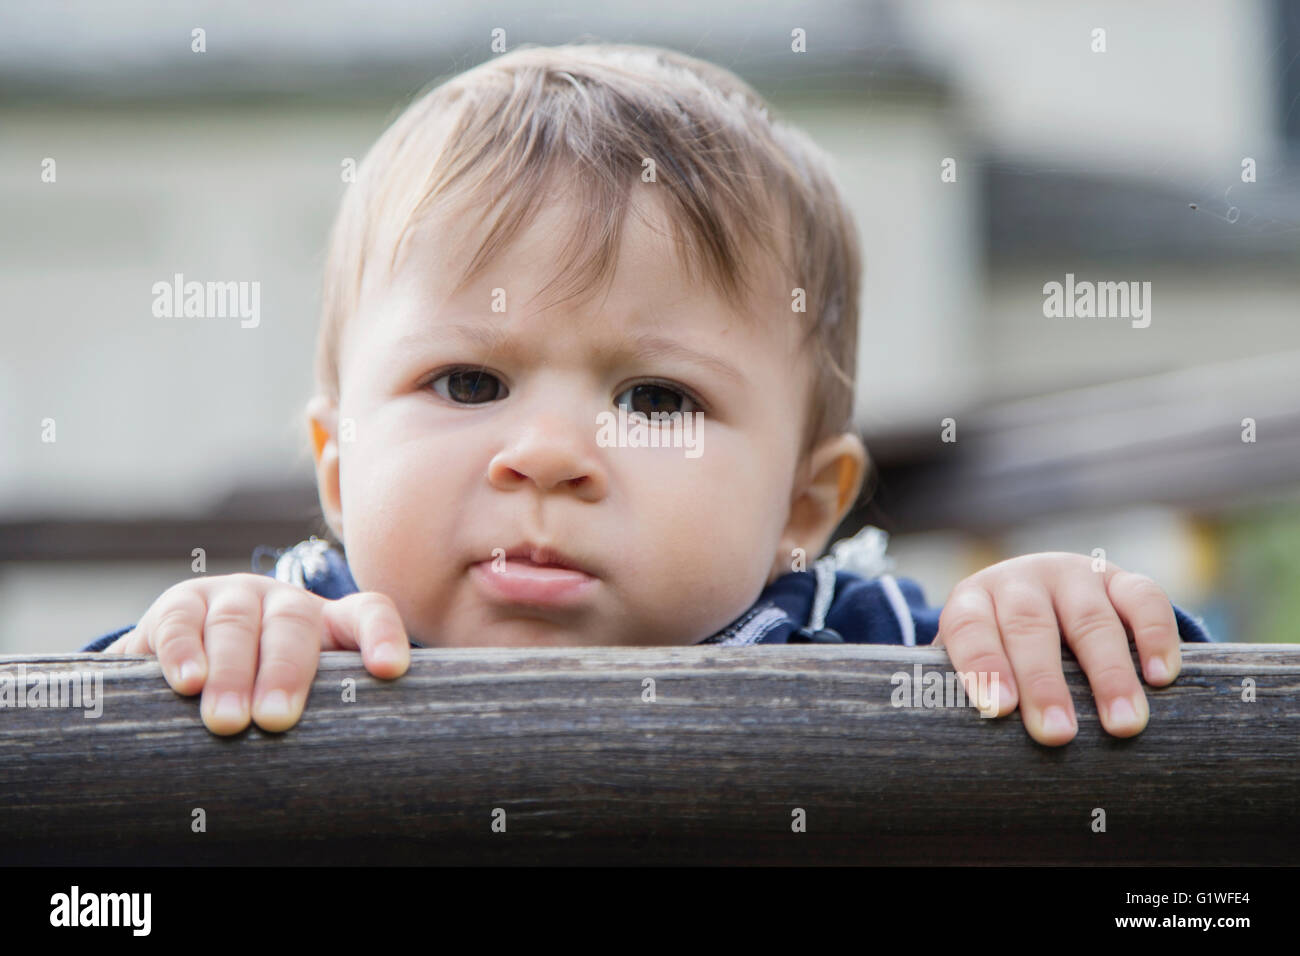 Portrait of one year old baby looking at camera seriously while holding hands on wooden fence Stock Photo